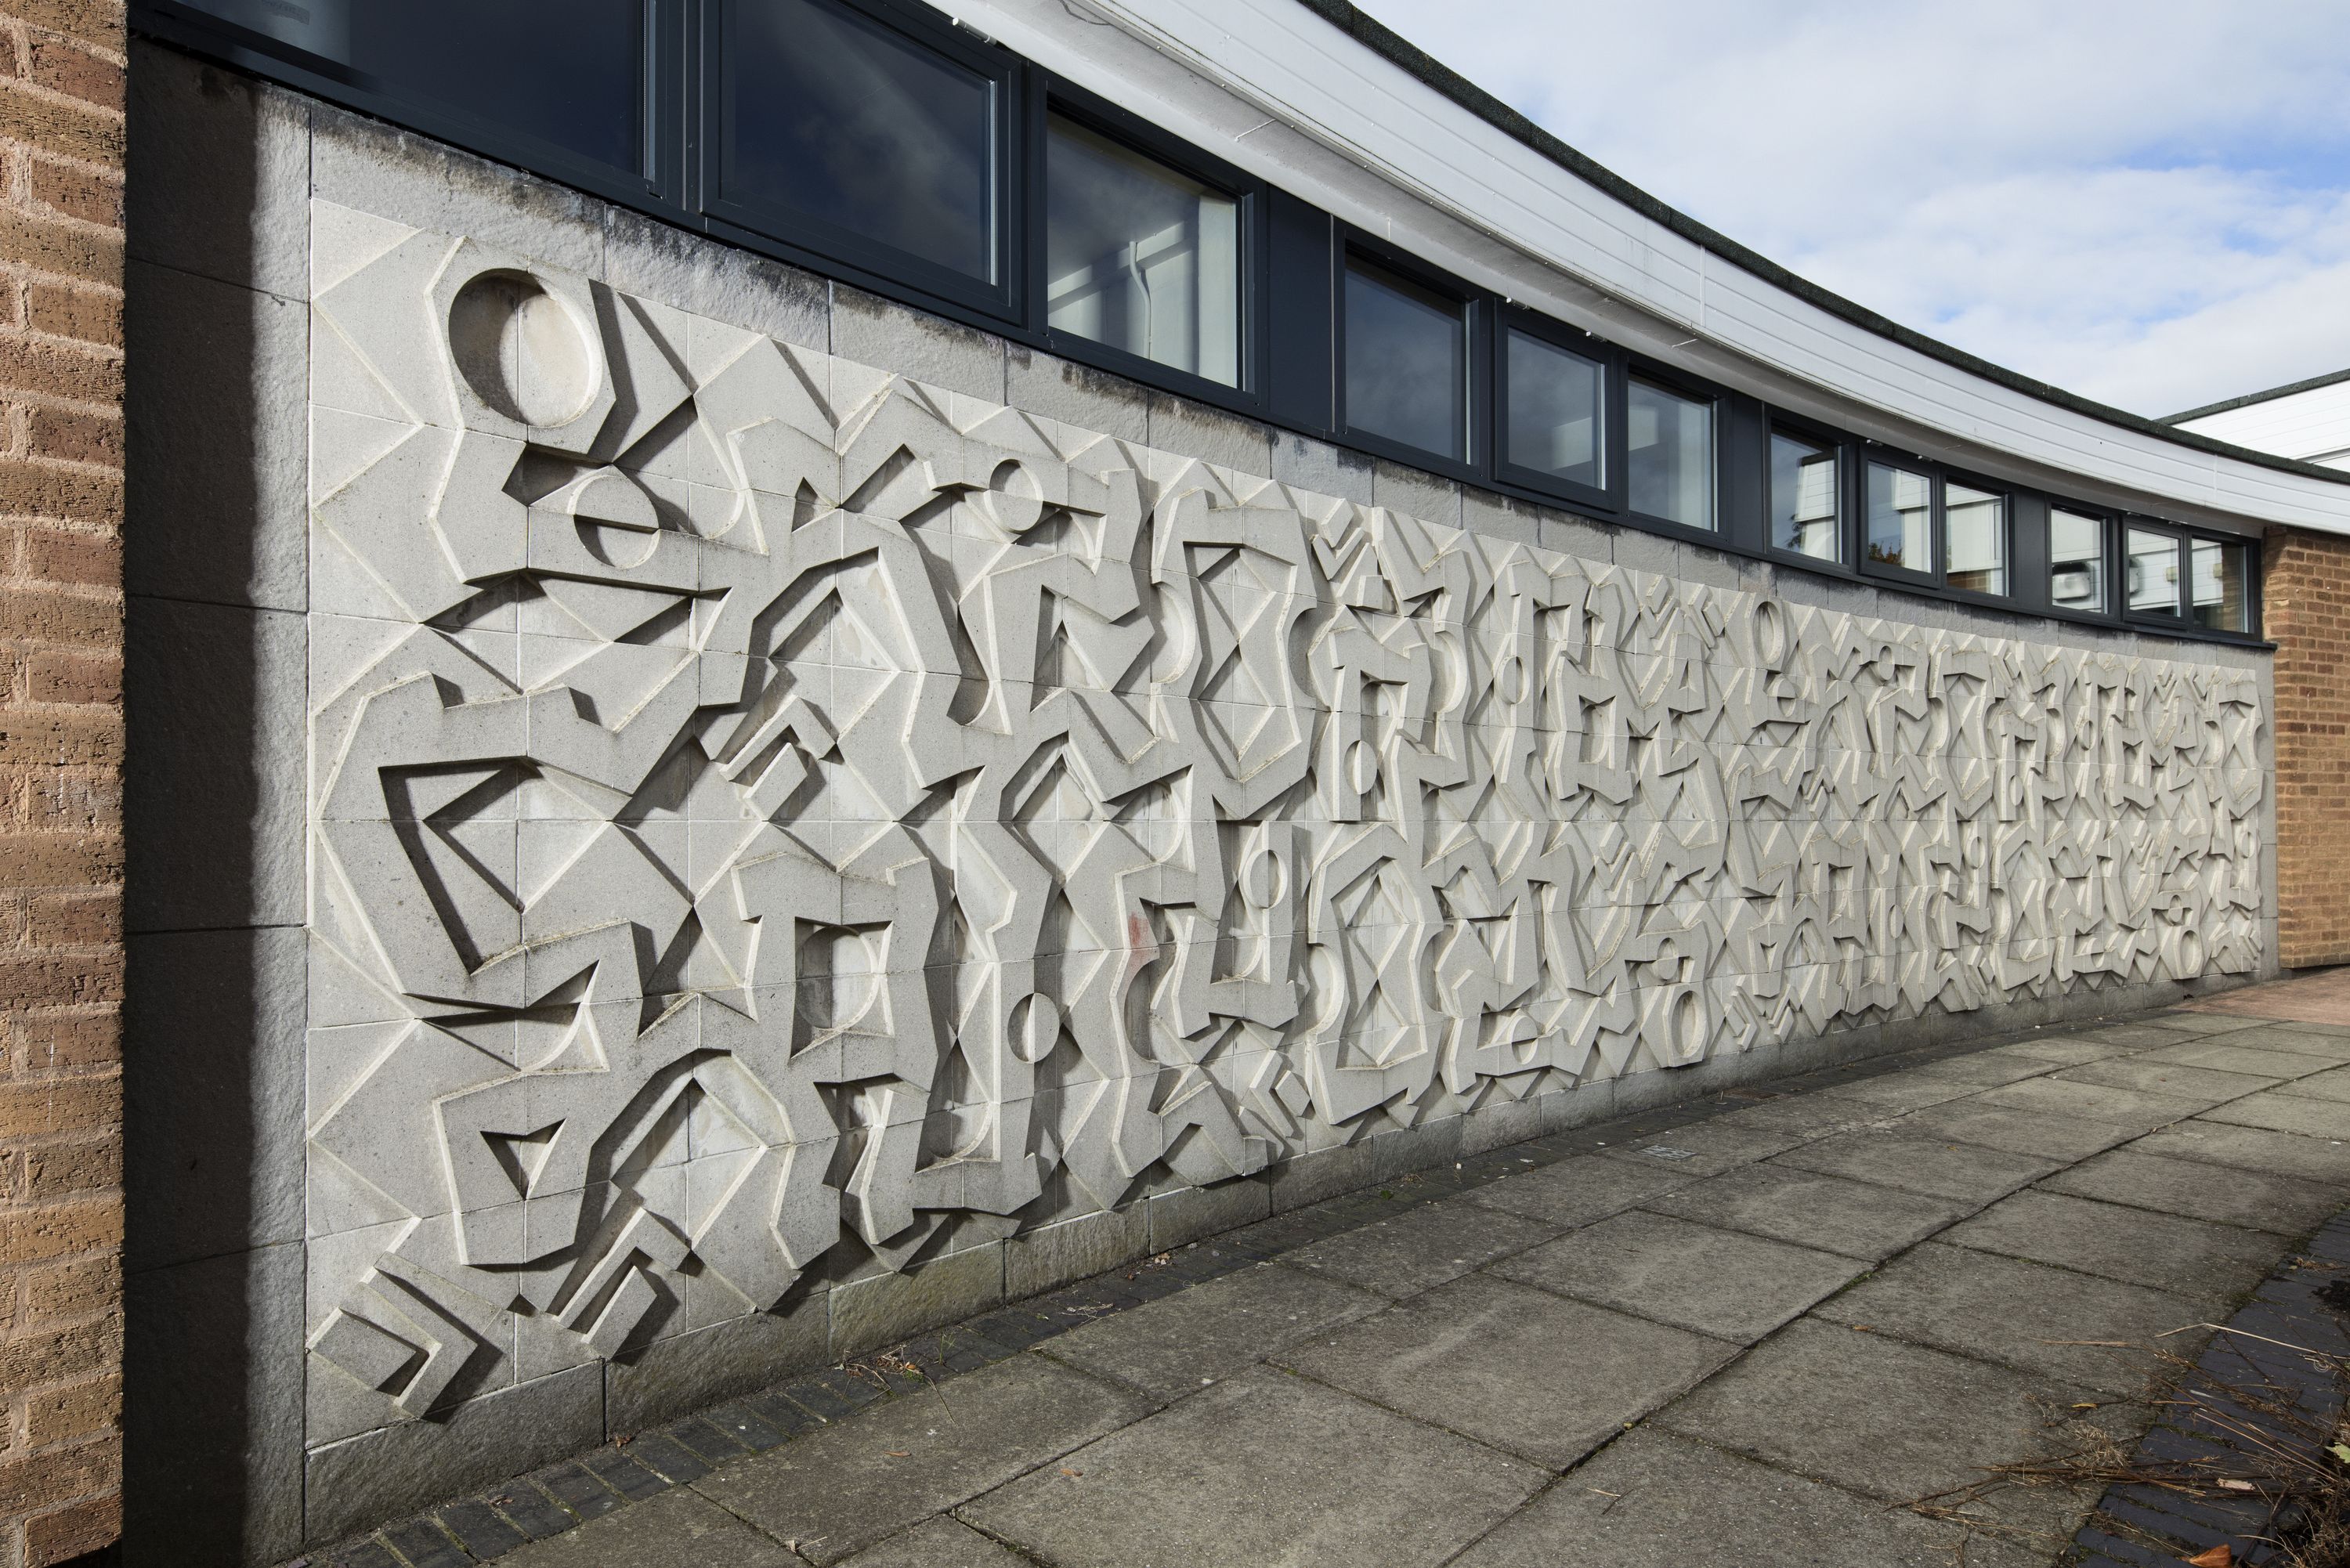 Artwork on an exterior wall of a school building